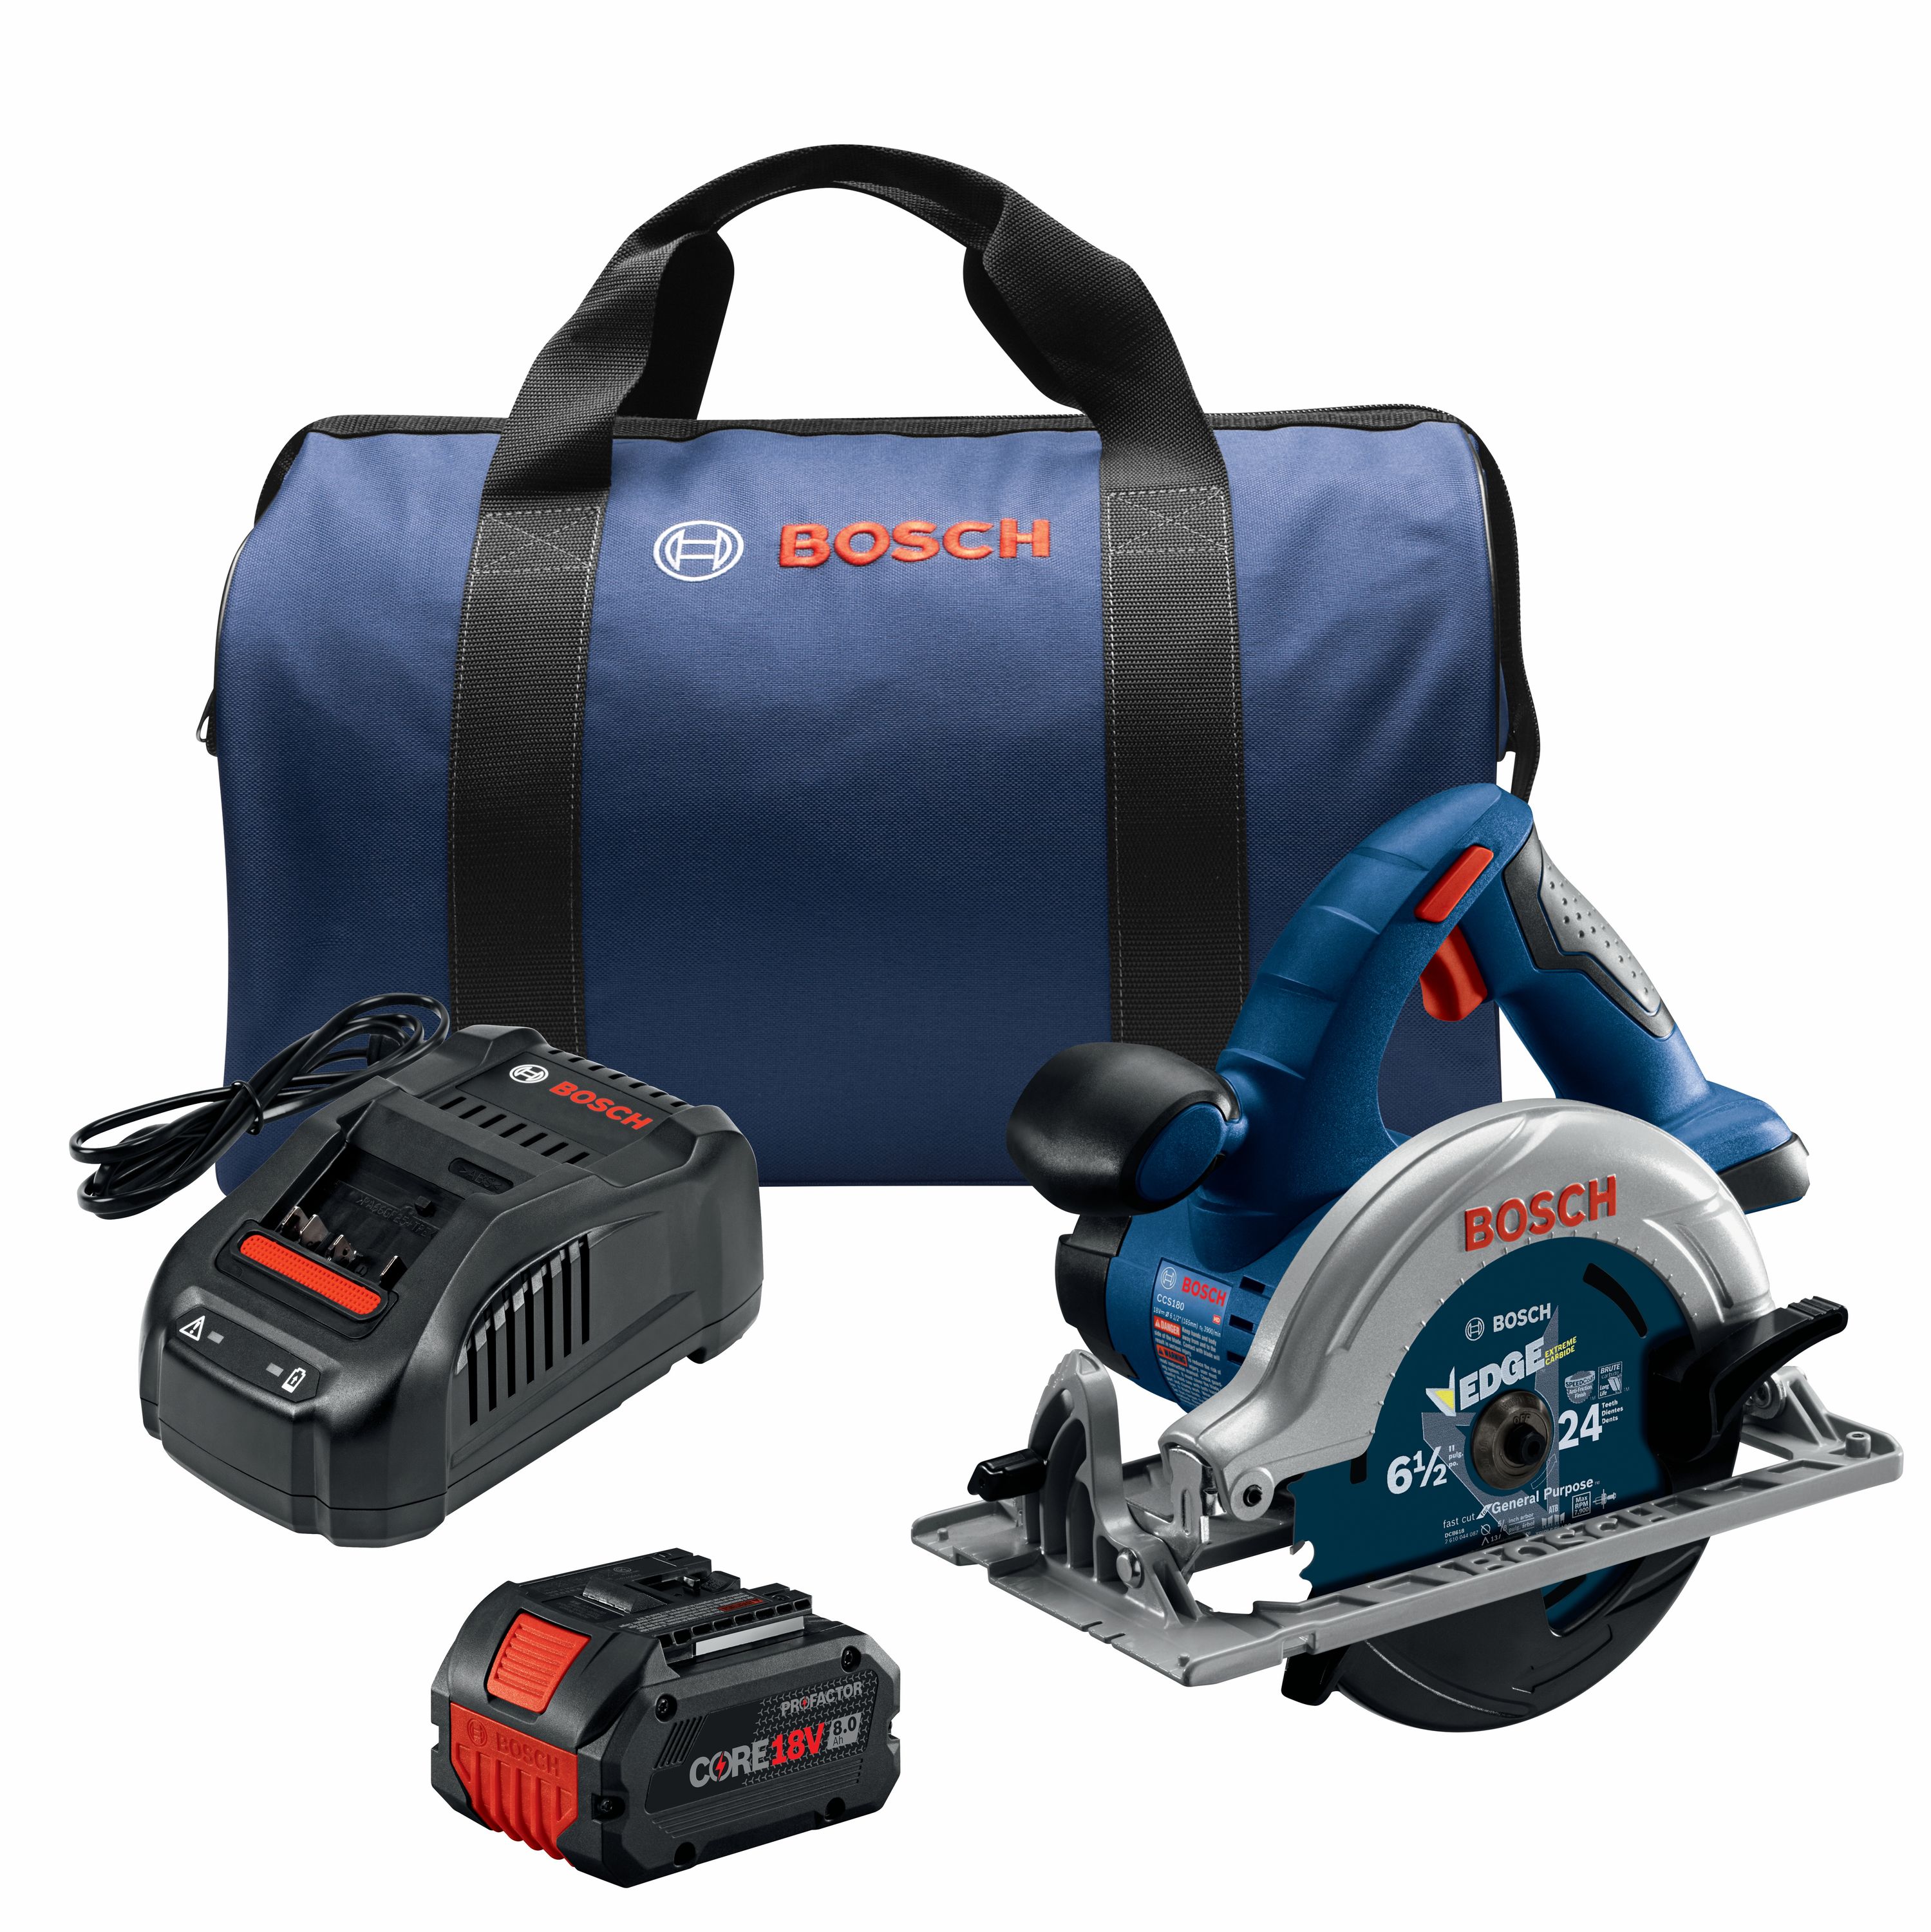 Bosch 18V 6 1/2in Circular Saw Blade Left Kit with 2 CORE18V 4Ah